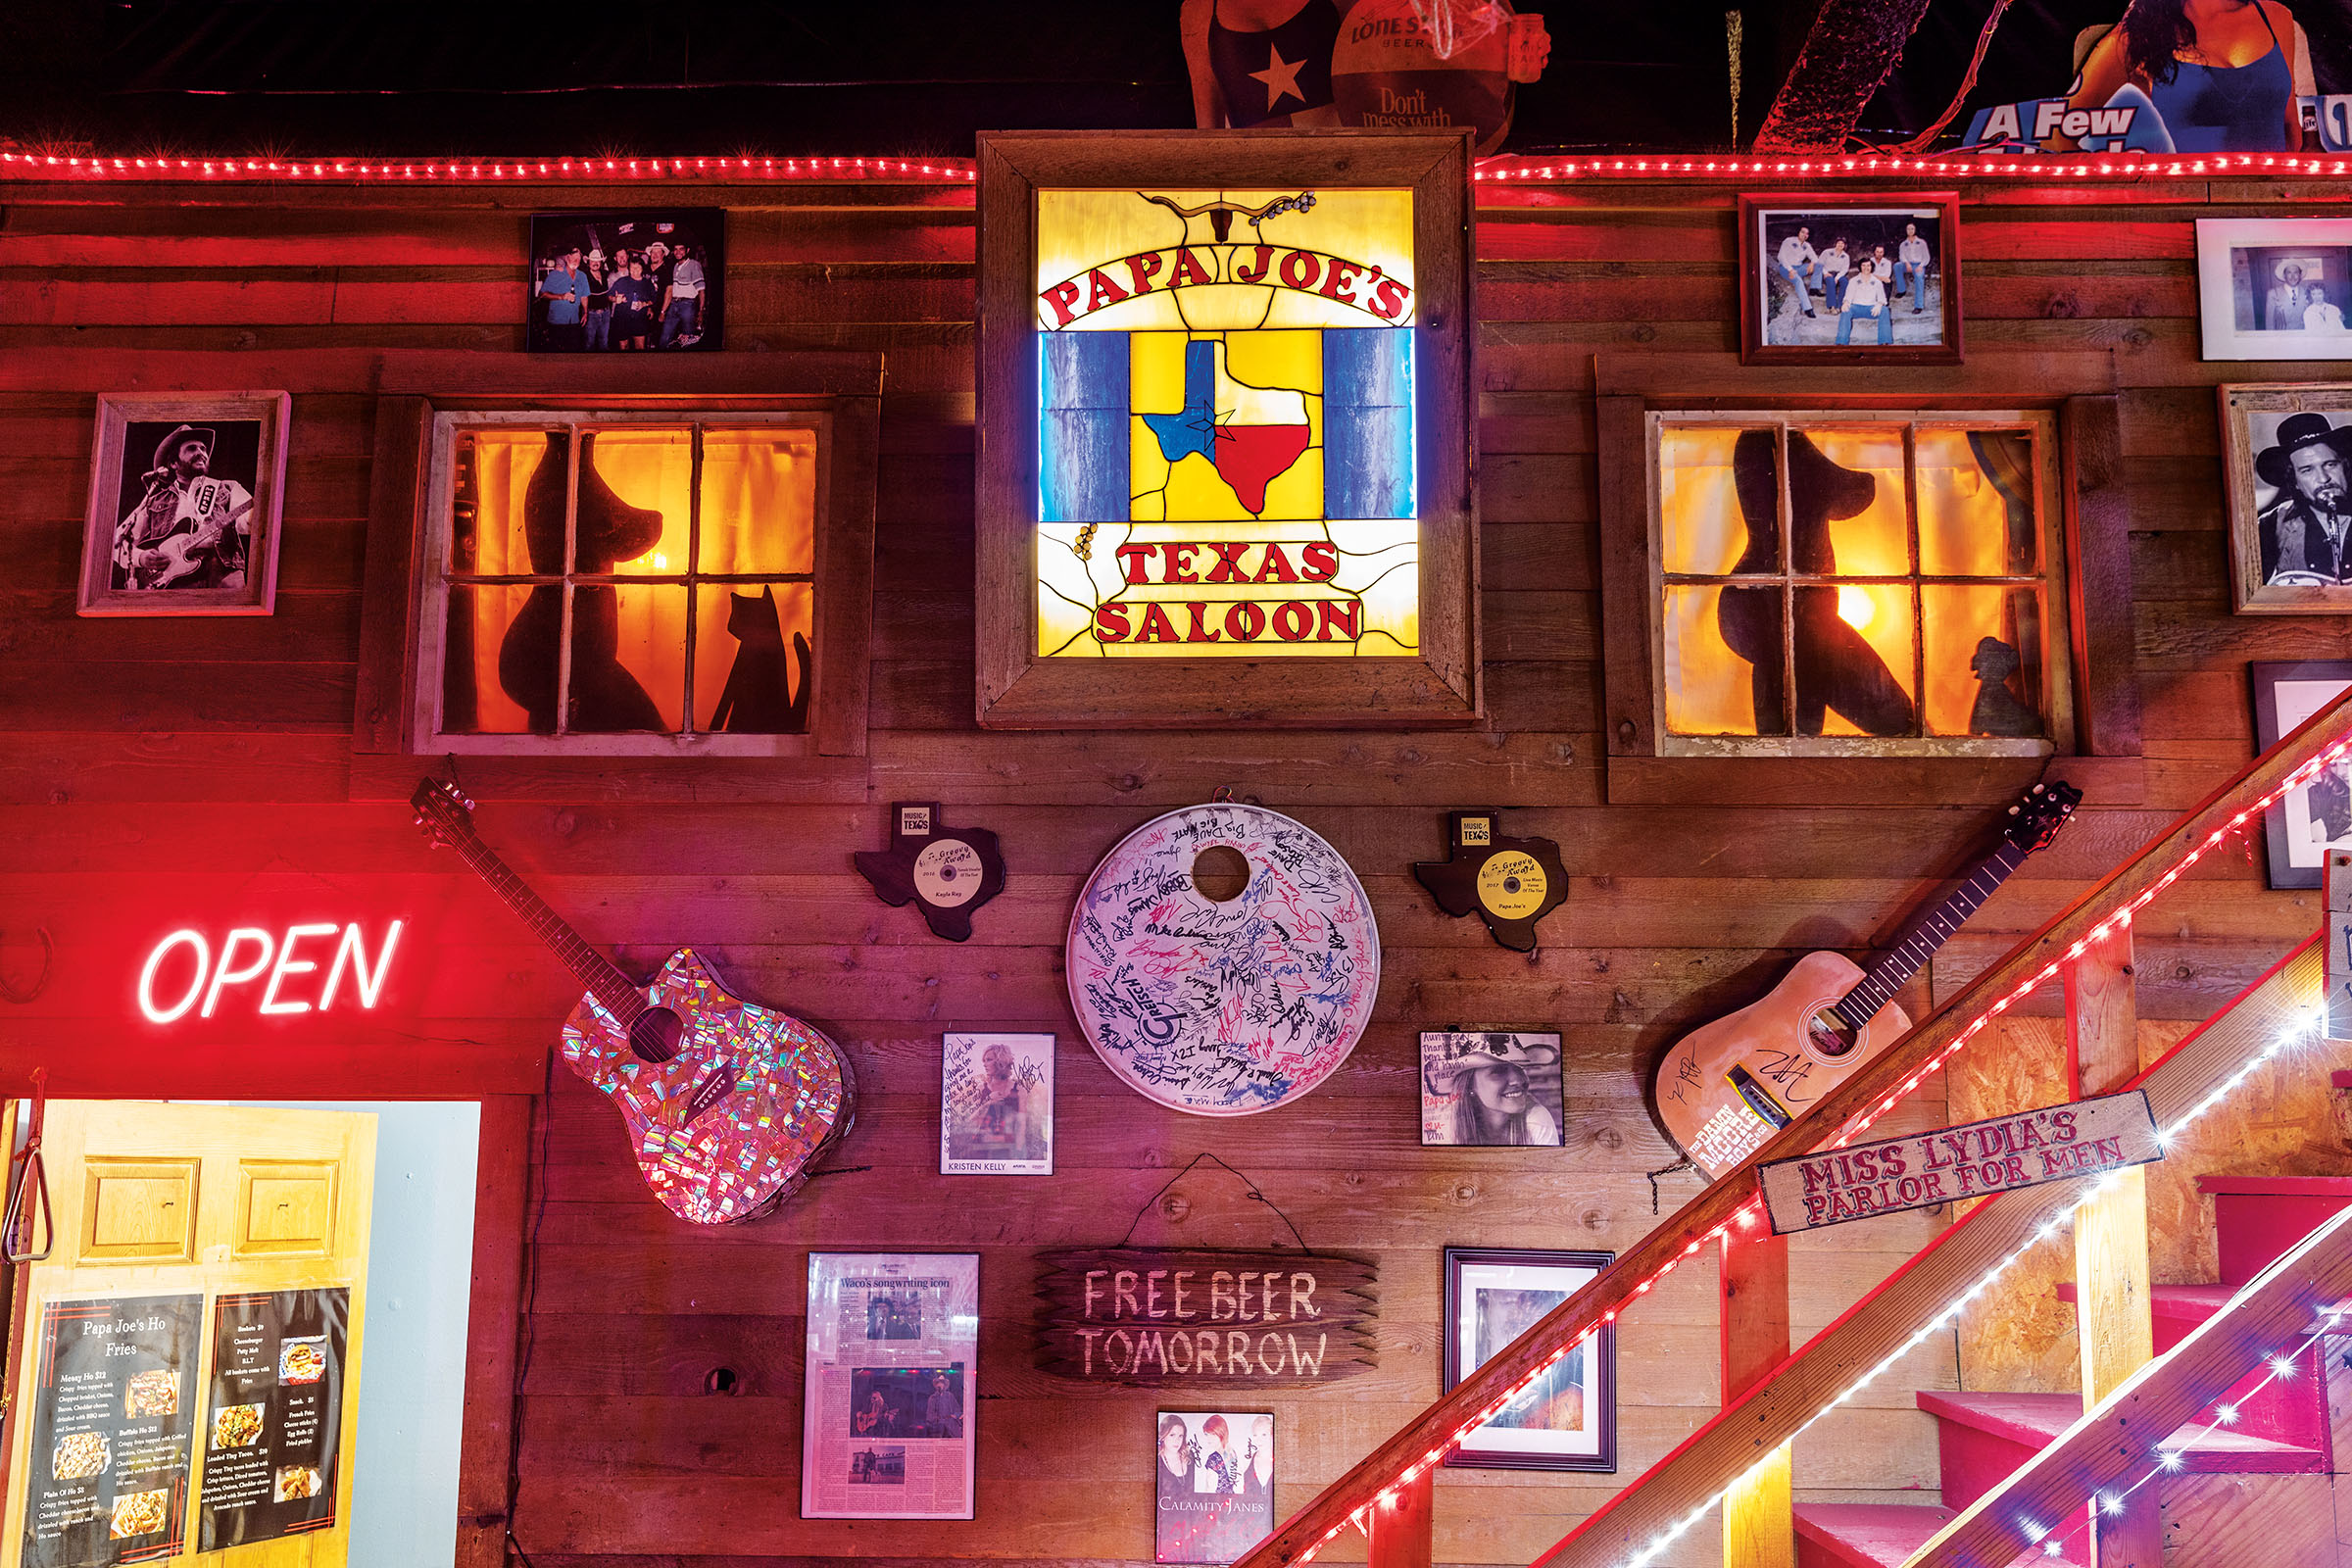 The wall of a saloon with large neon signs, lighted windows and memorabilia